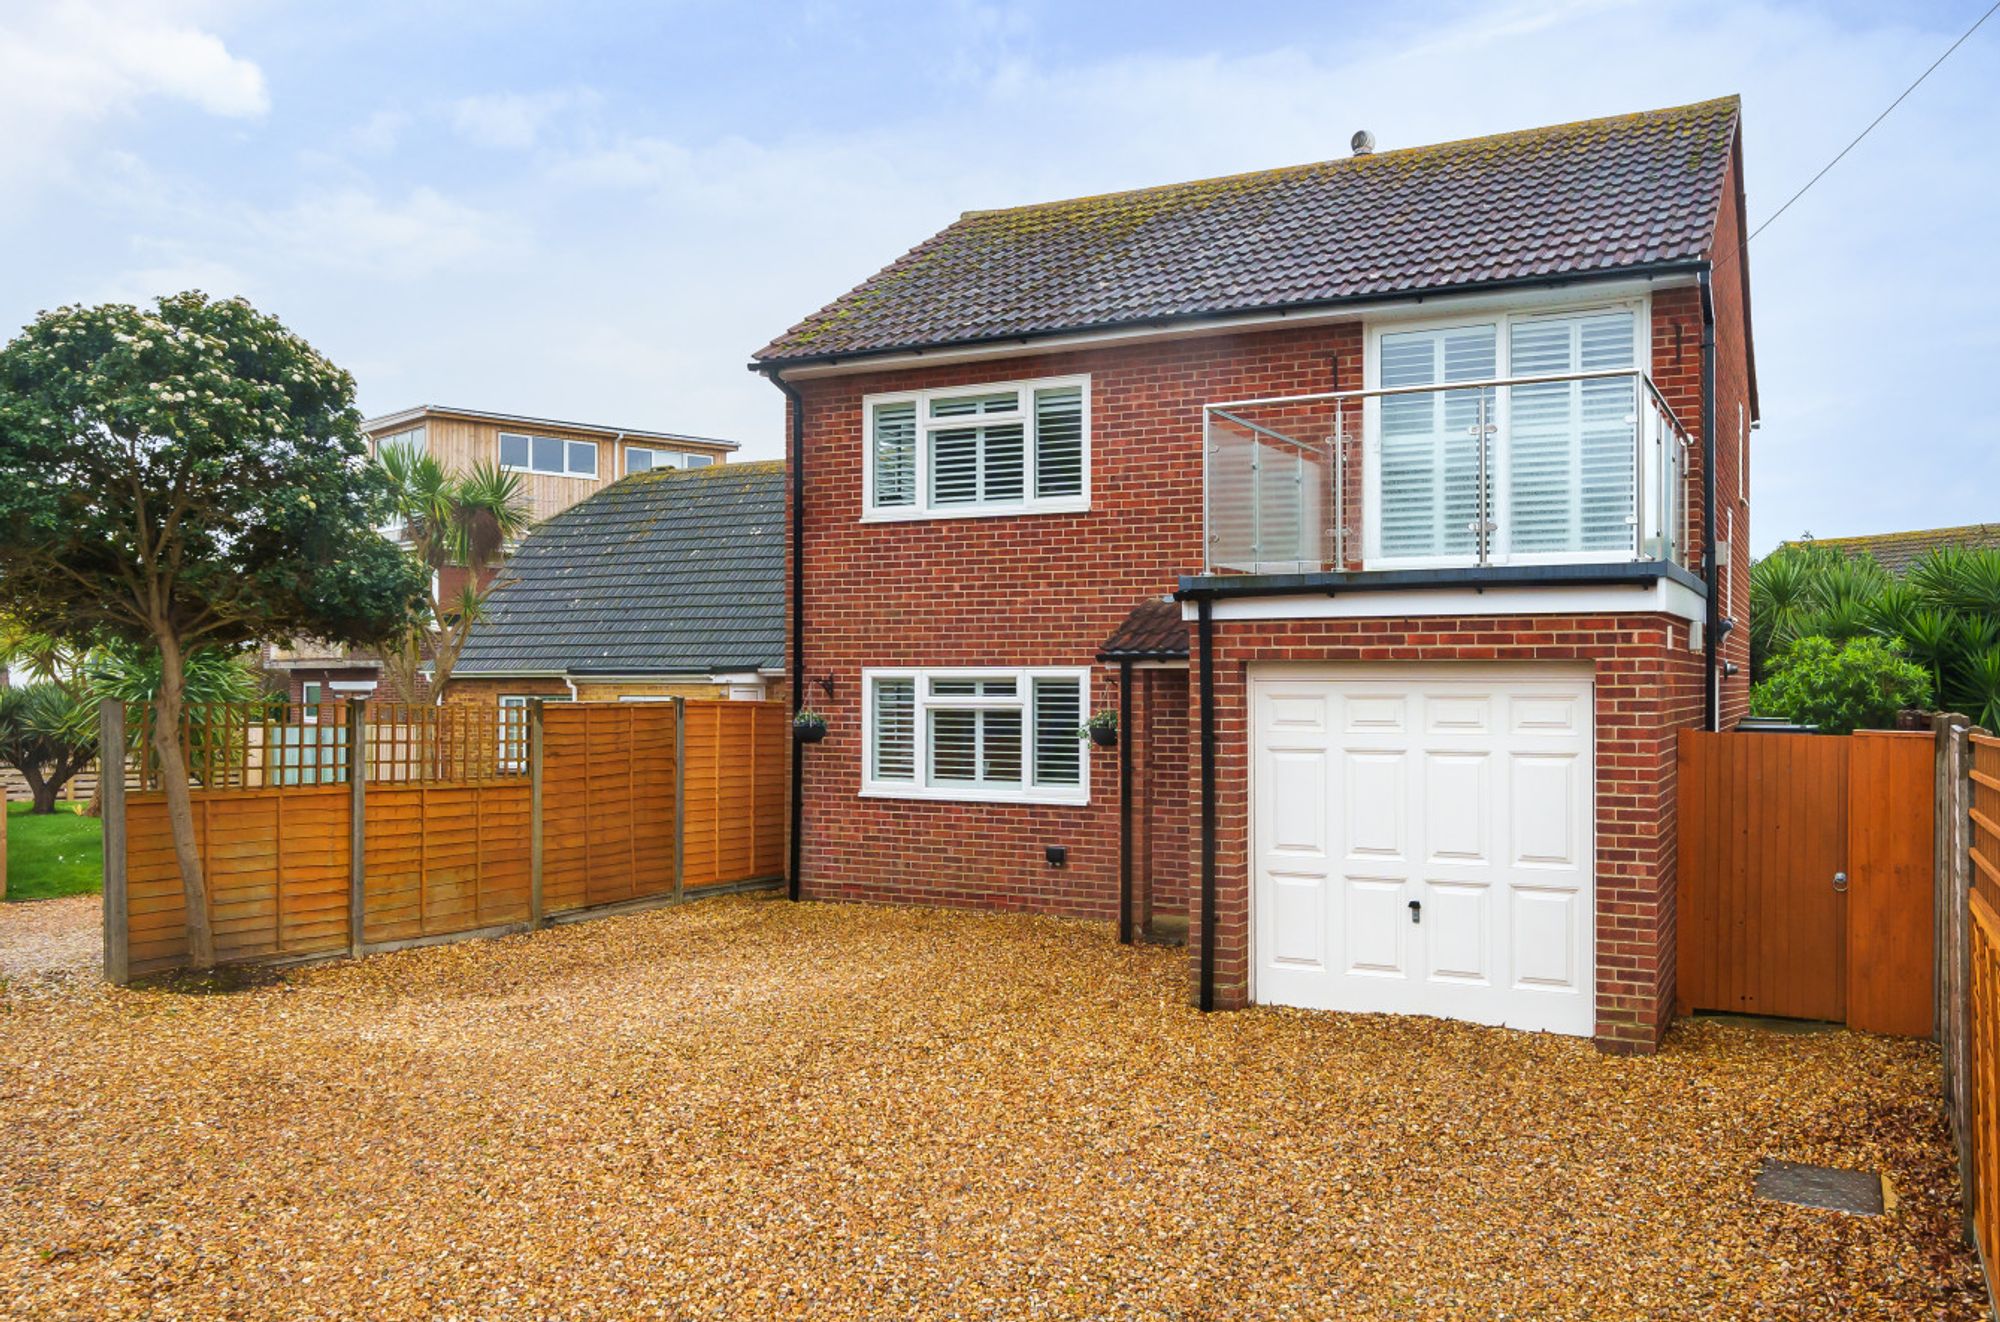 Wittering Road, Hayling Island, PO11